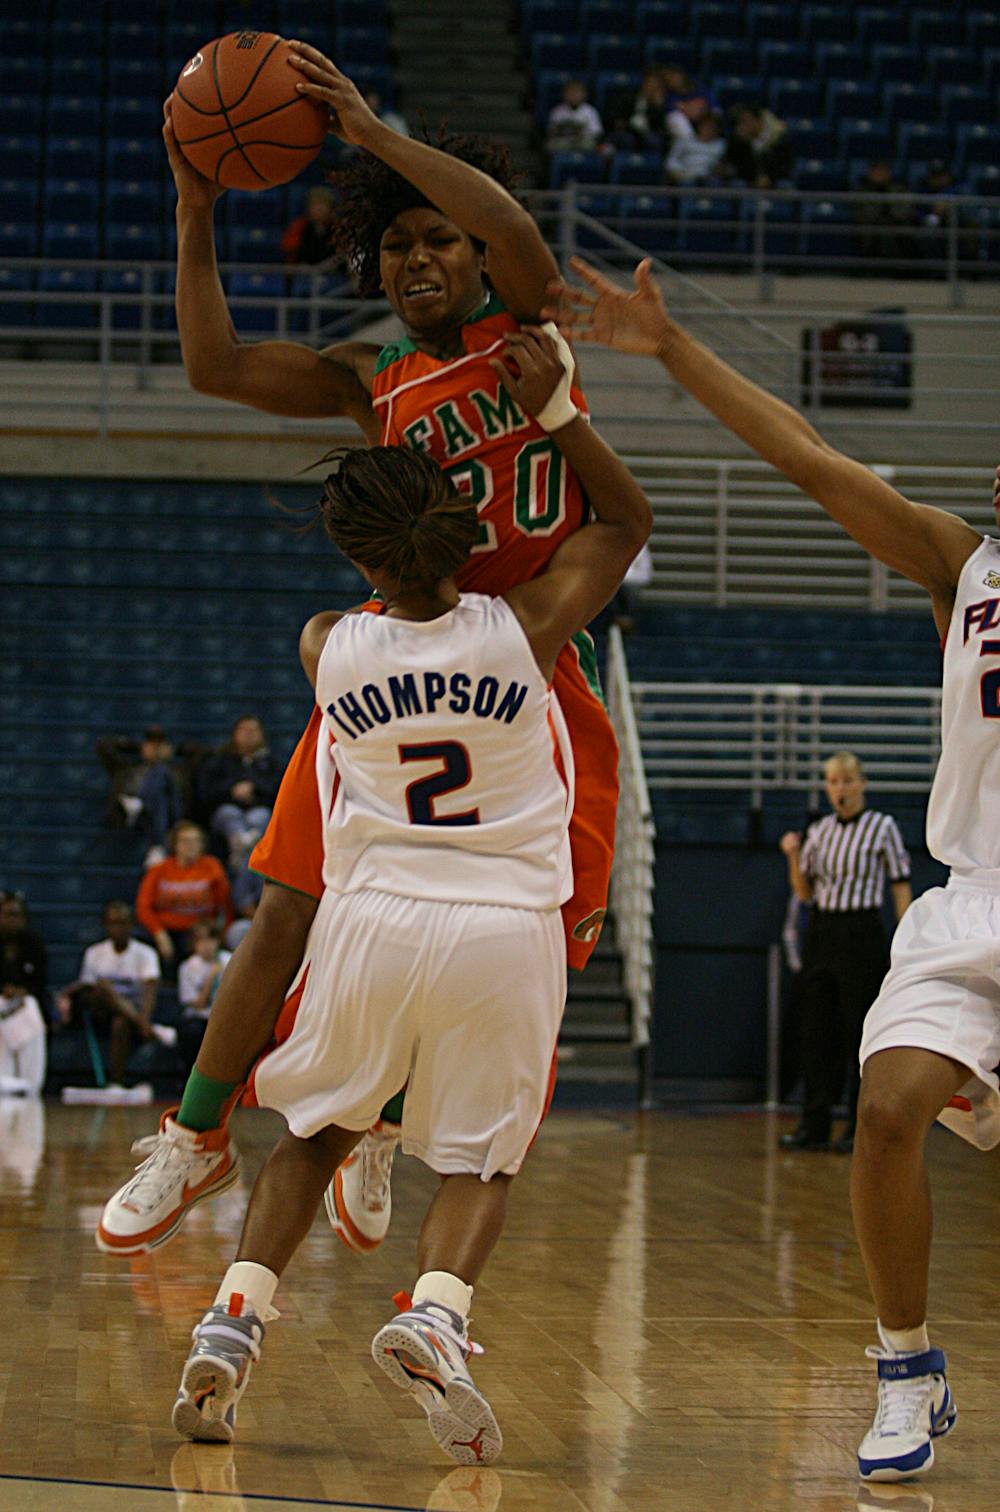 Lonnika Thompson blocks a shot during the Gators' 71-51 win against Florida A&M University on Jan. 2 at the O'Connell Center. (Jeremiah Stanley / Alligator)